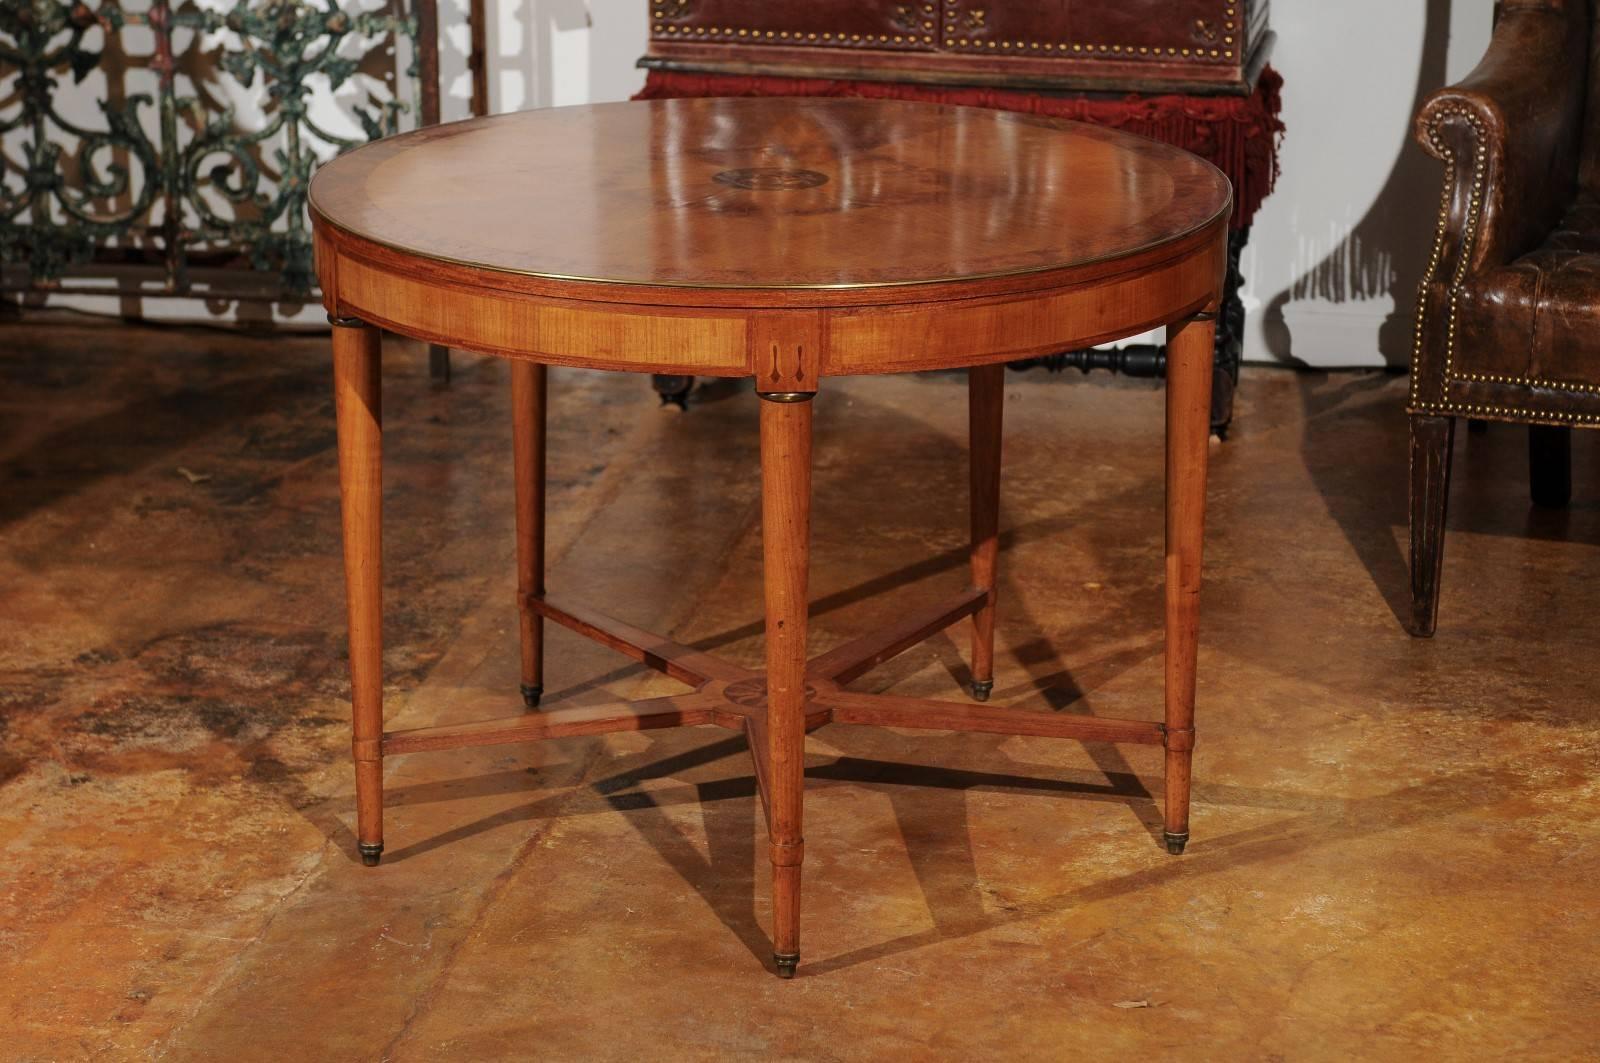 French 1880s Round Burl Walnut Inlaid Table with Star-Shaped Cross Stretcher 2